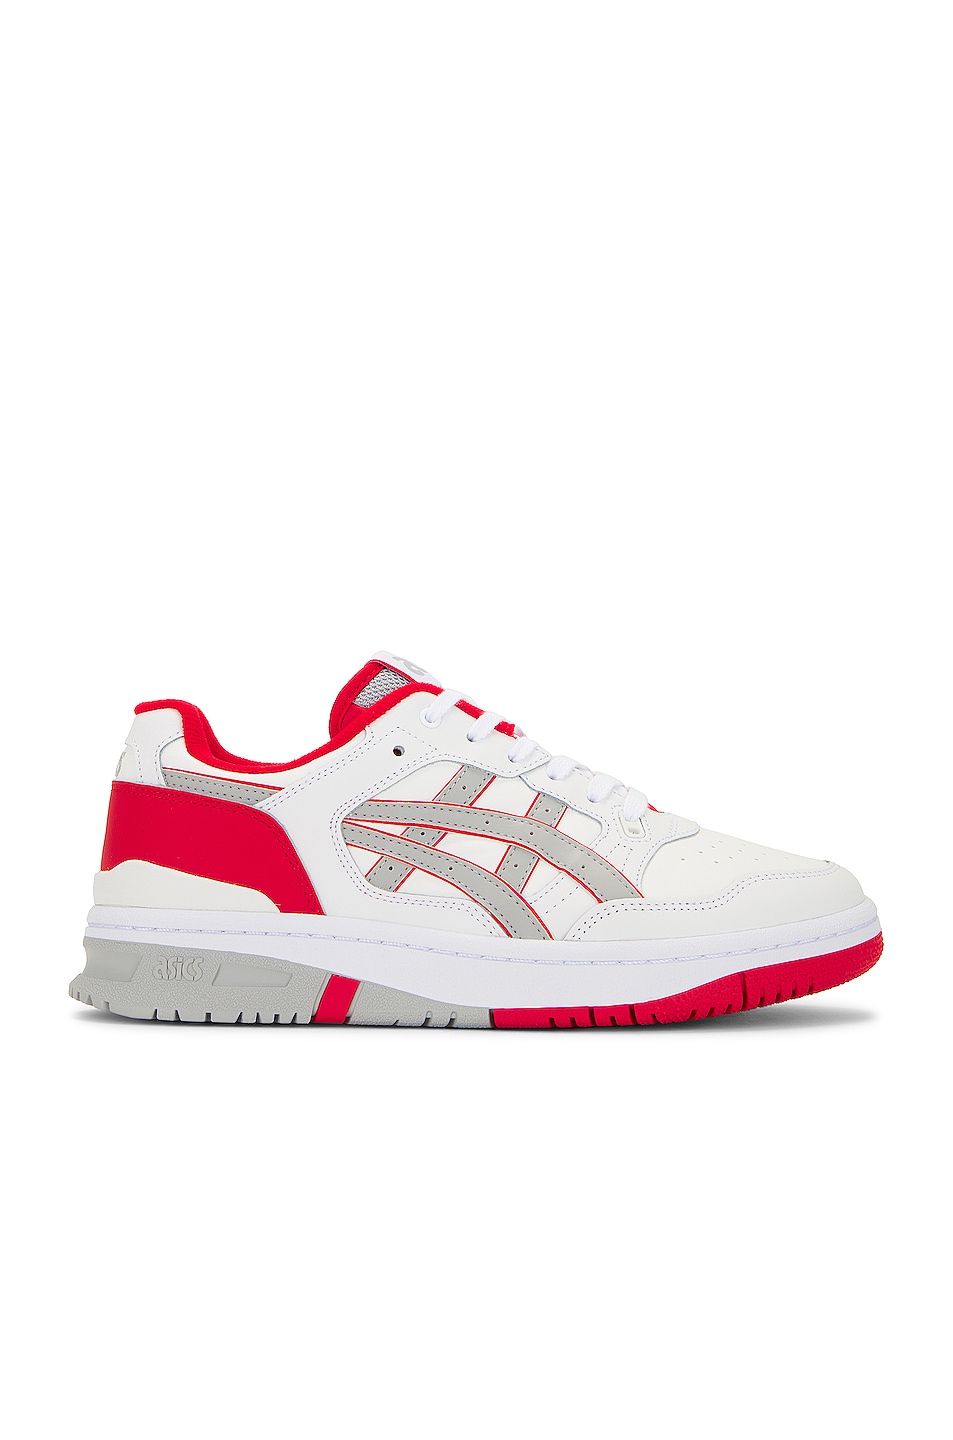 Image 1 of Asics Ex89 Sneaker in White & Classic Red